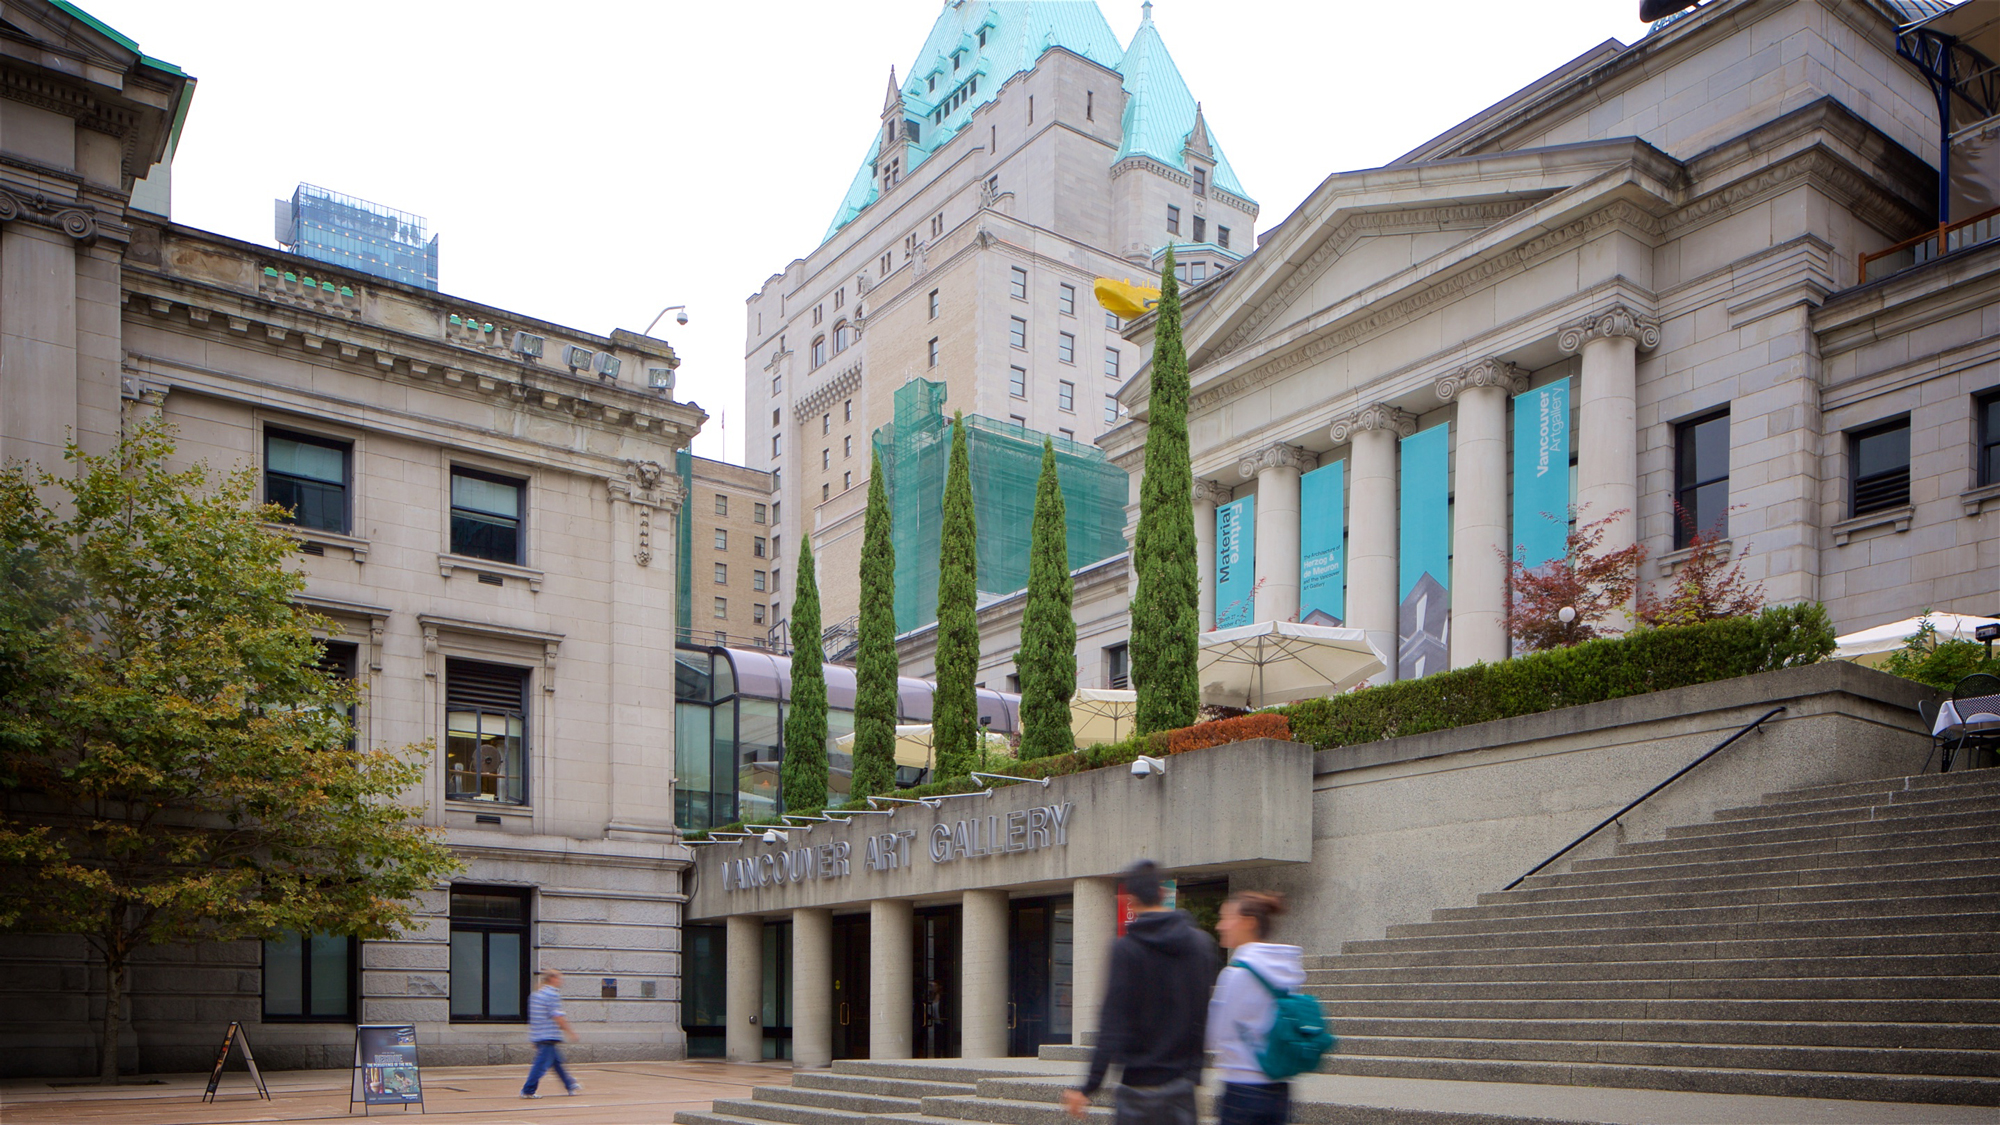 Vancouver Art Gallery is a Canadian museum with a virtual tour